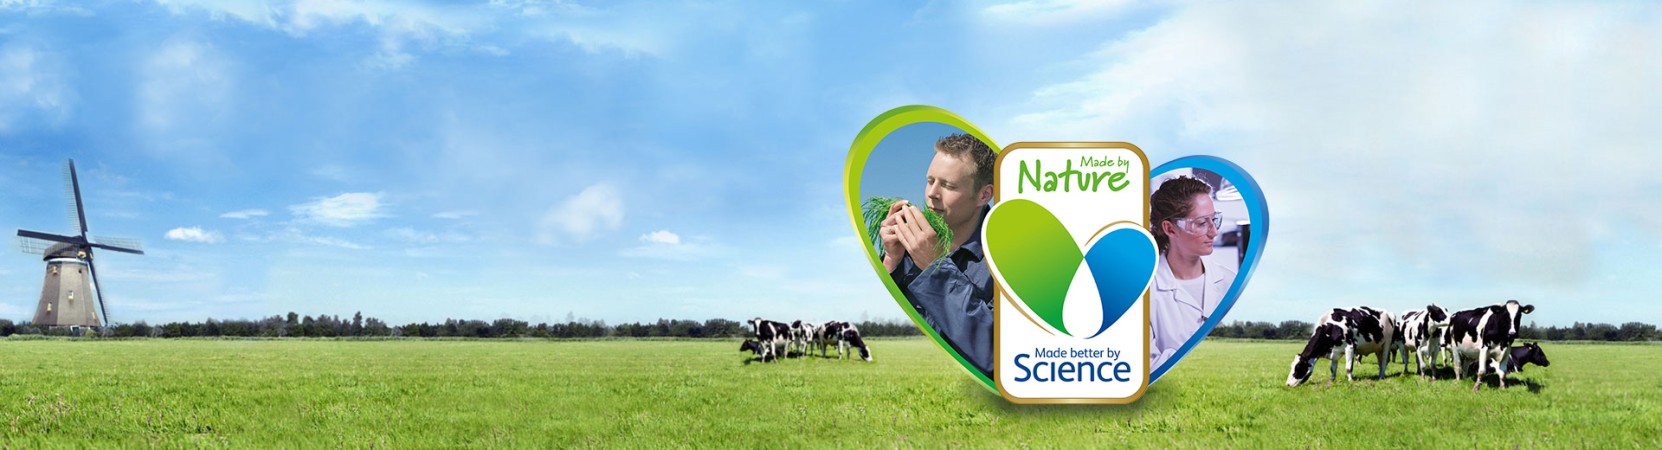 campaign-featured-banner-naturescience